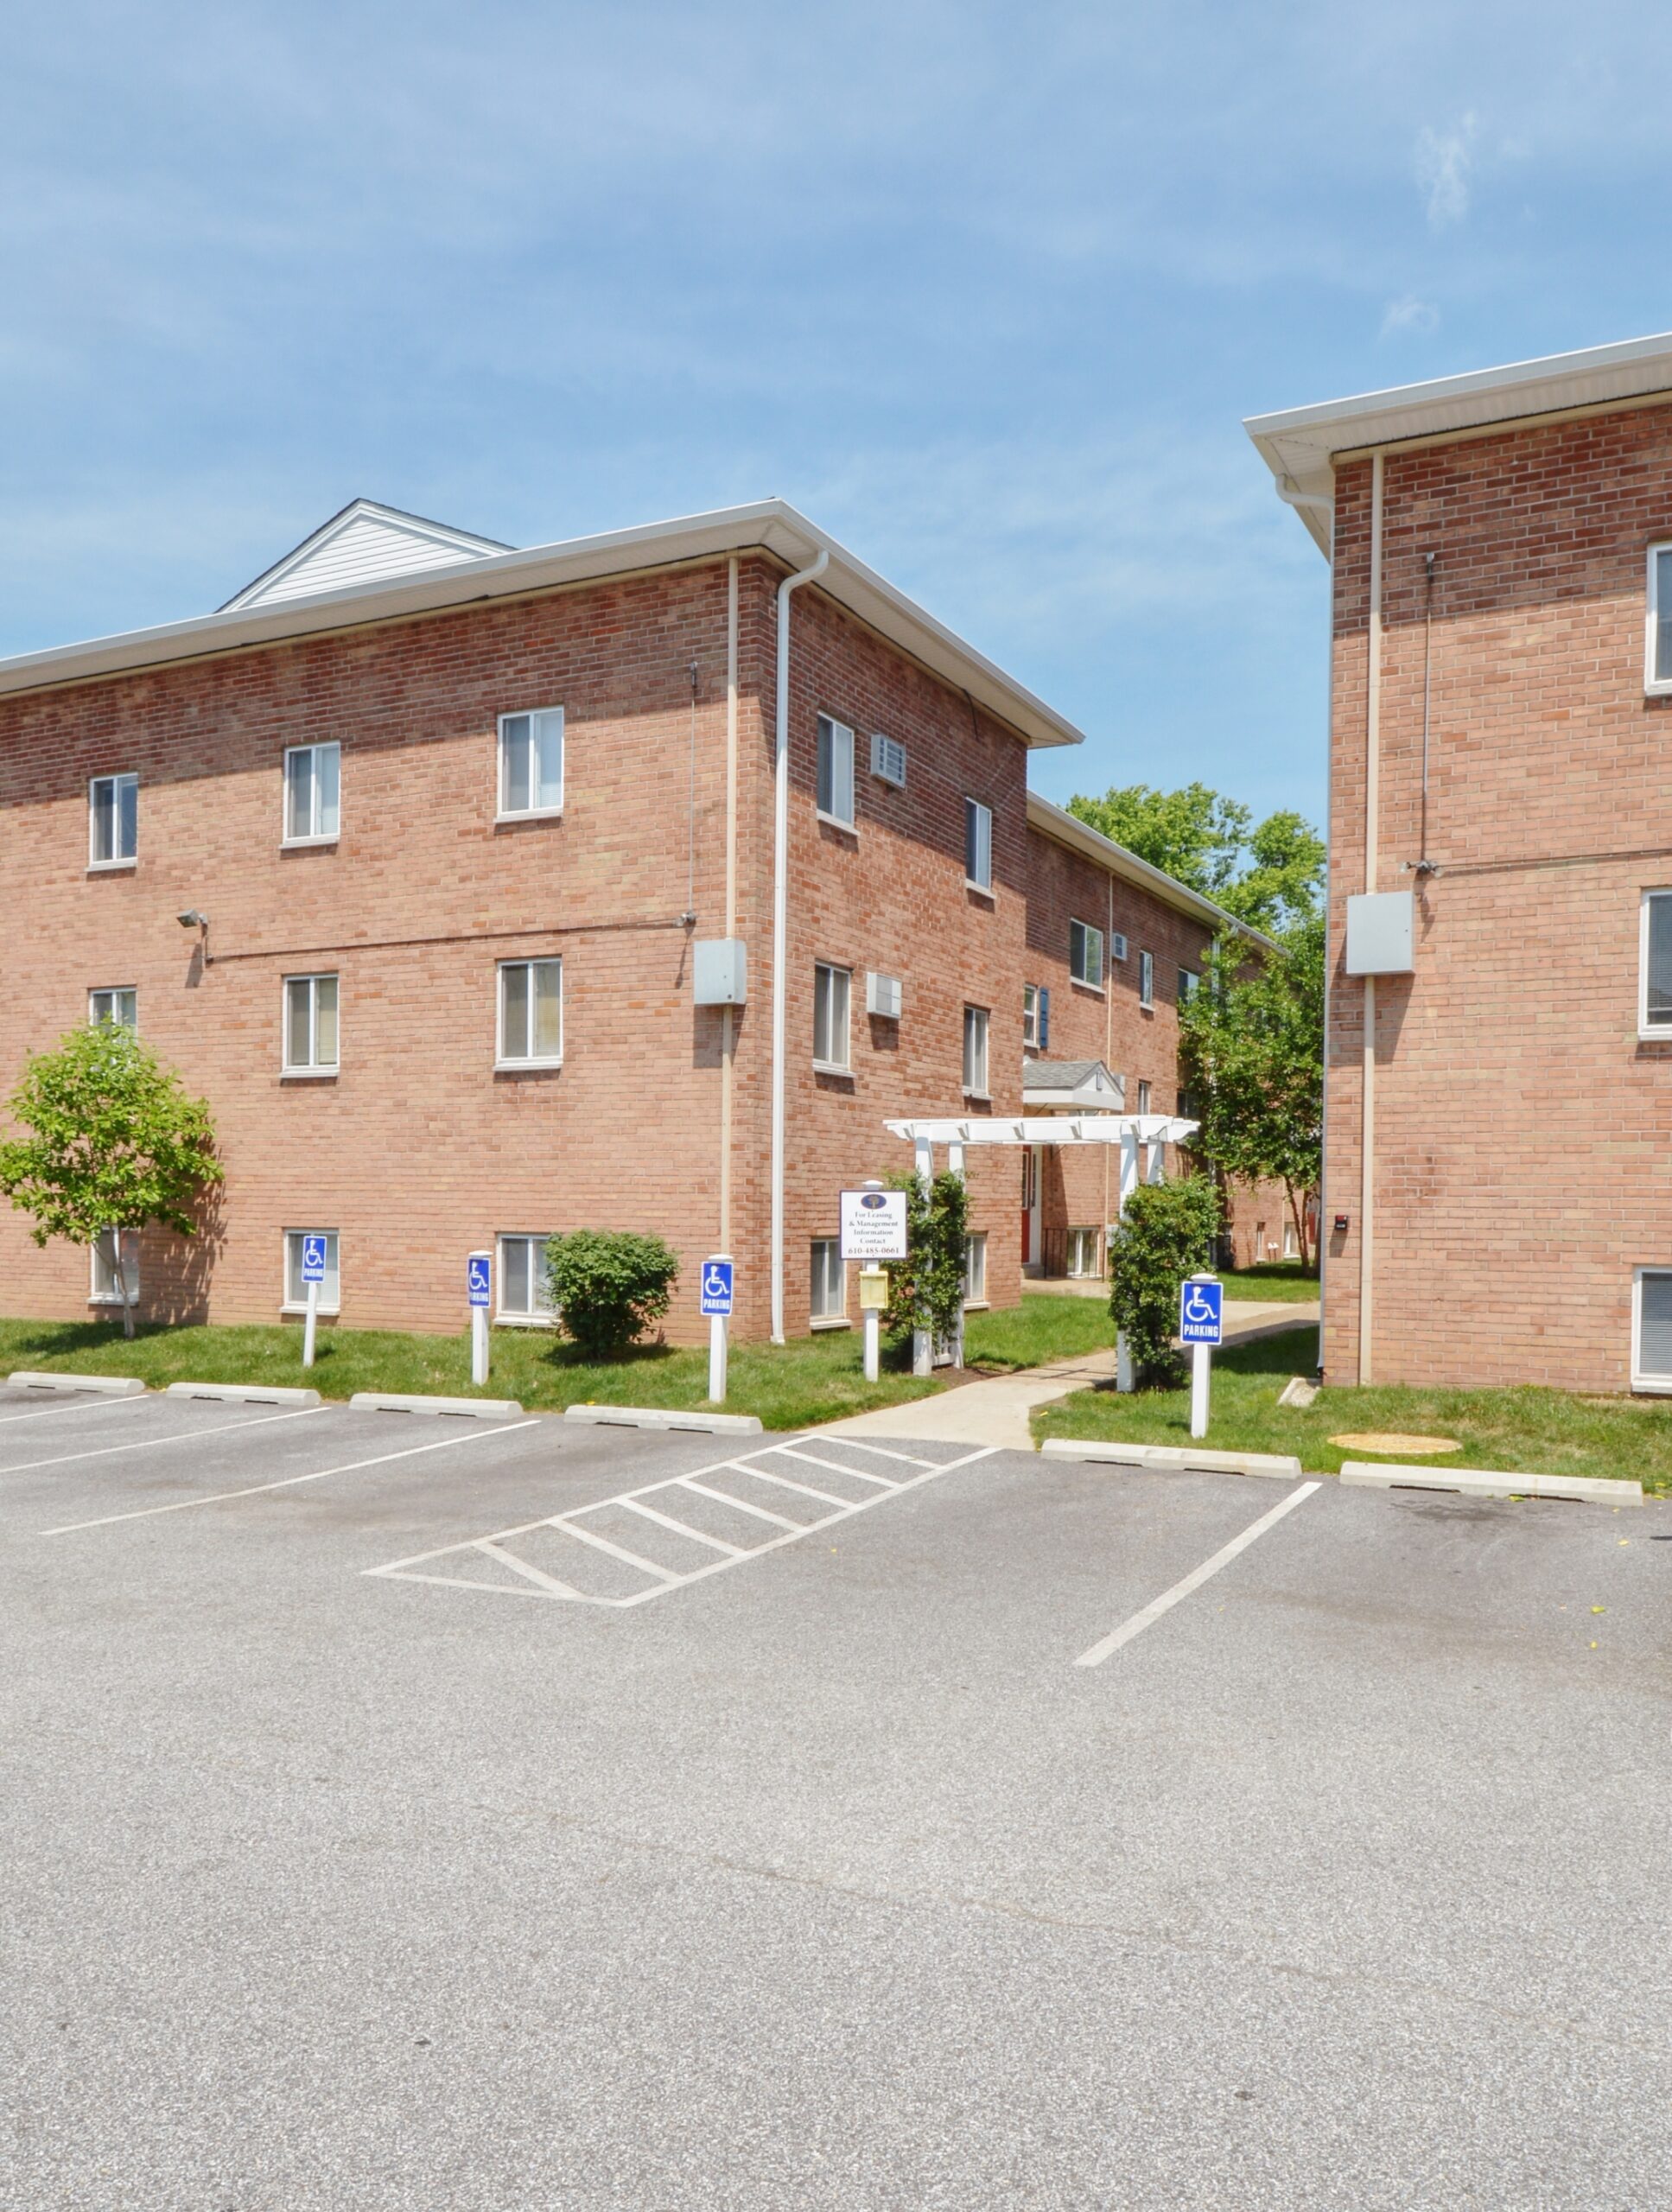 Exterior of an apartment building at Boothwyn Court apartments, fitted with parking spots, and a paved walkway